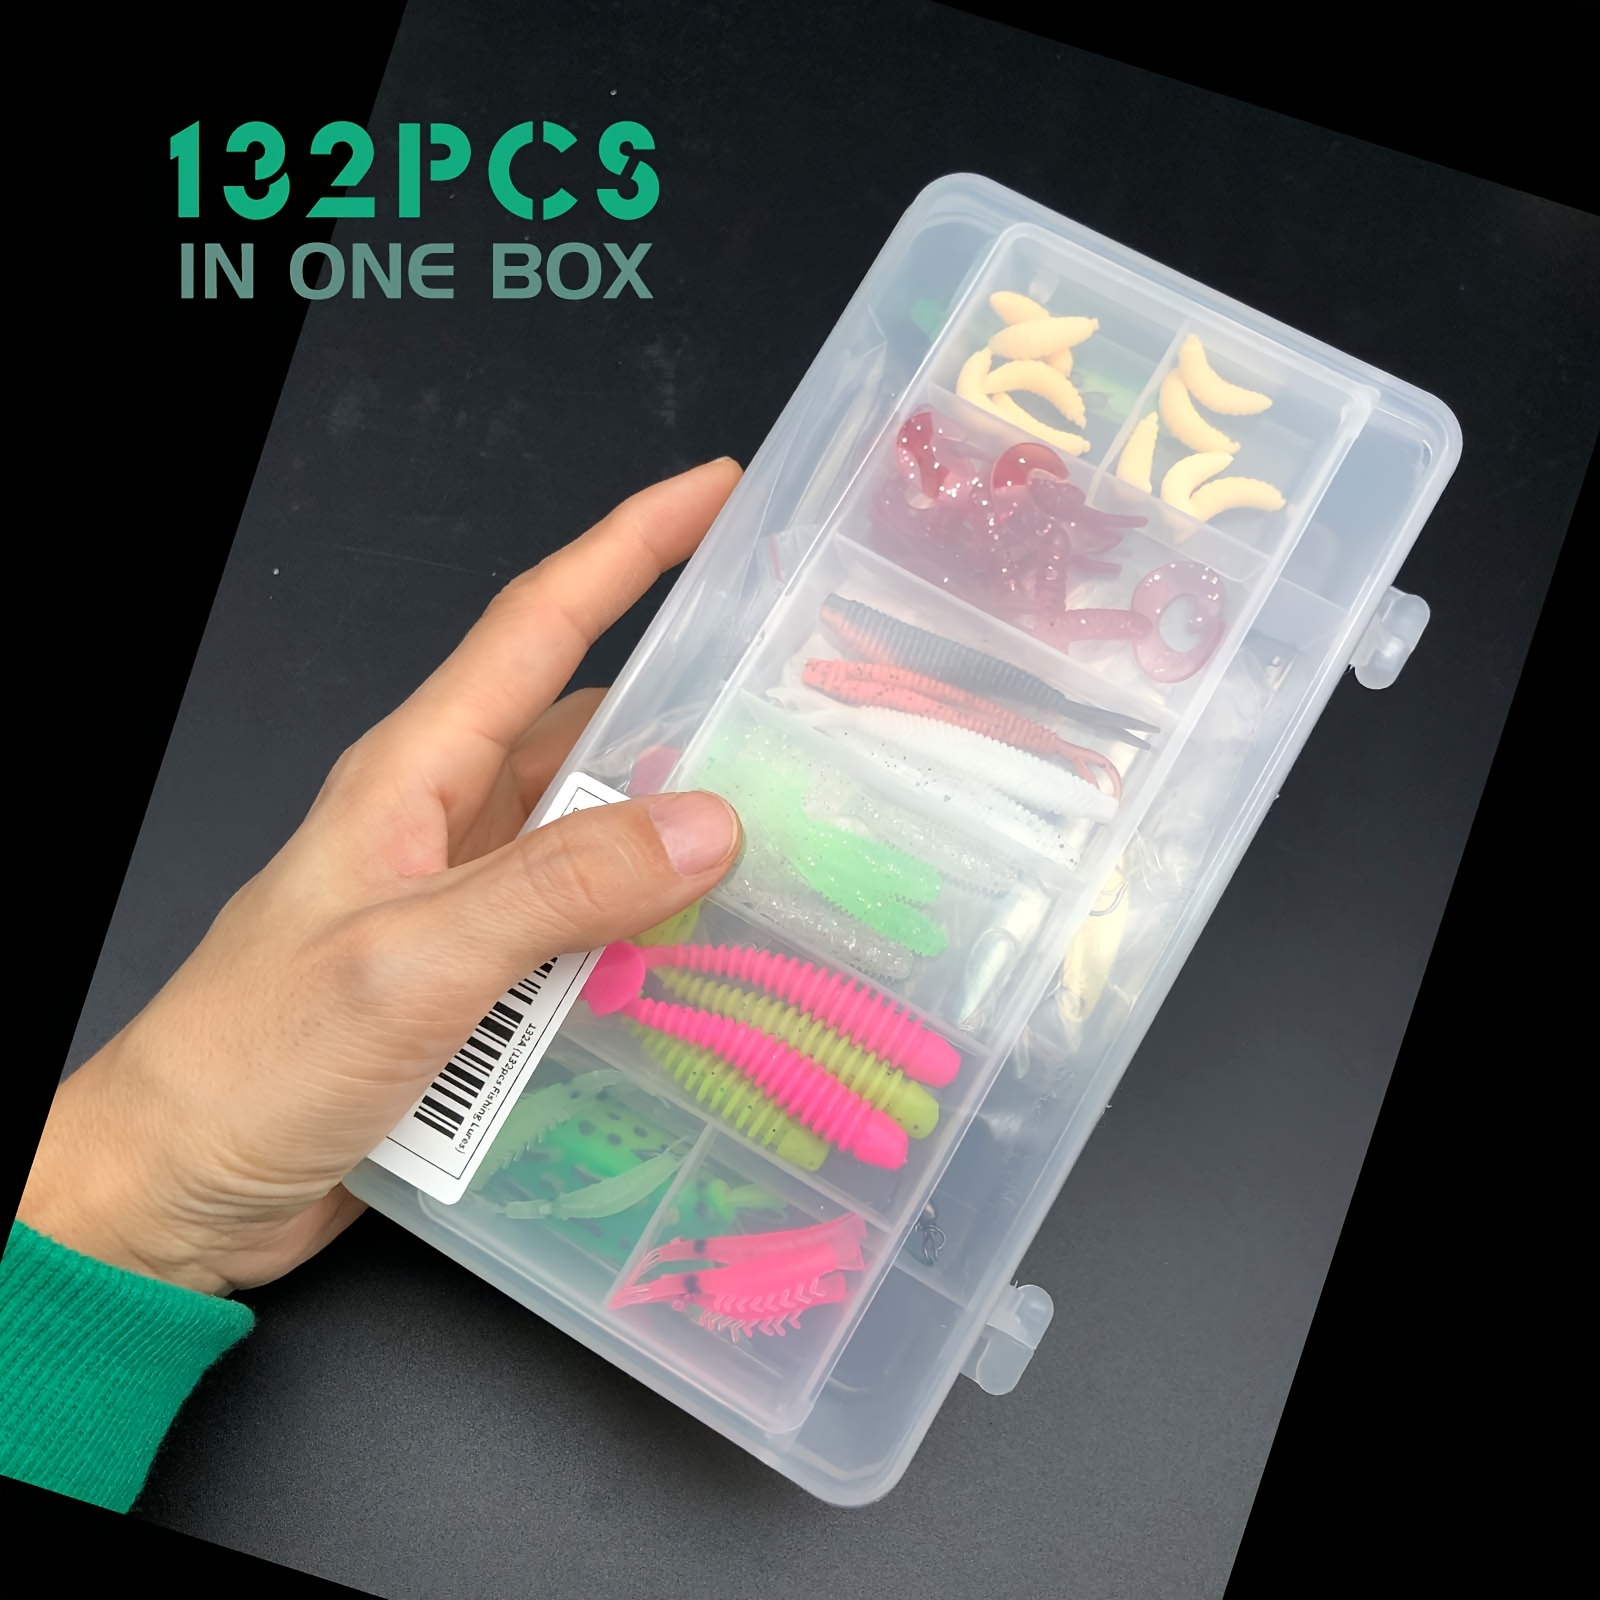 26 107 132 284pcs fishing lures kit tackle box with hard lures spoon lures soft plastic worms swimbaits crankbait jigs hooks for bass trout salmon fishing details 6